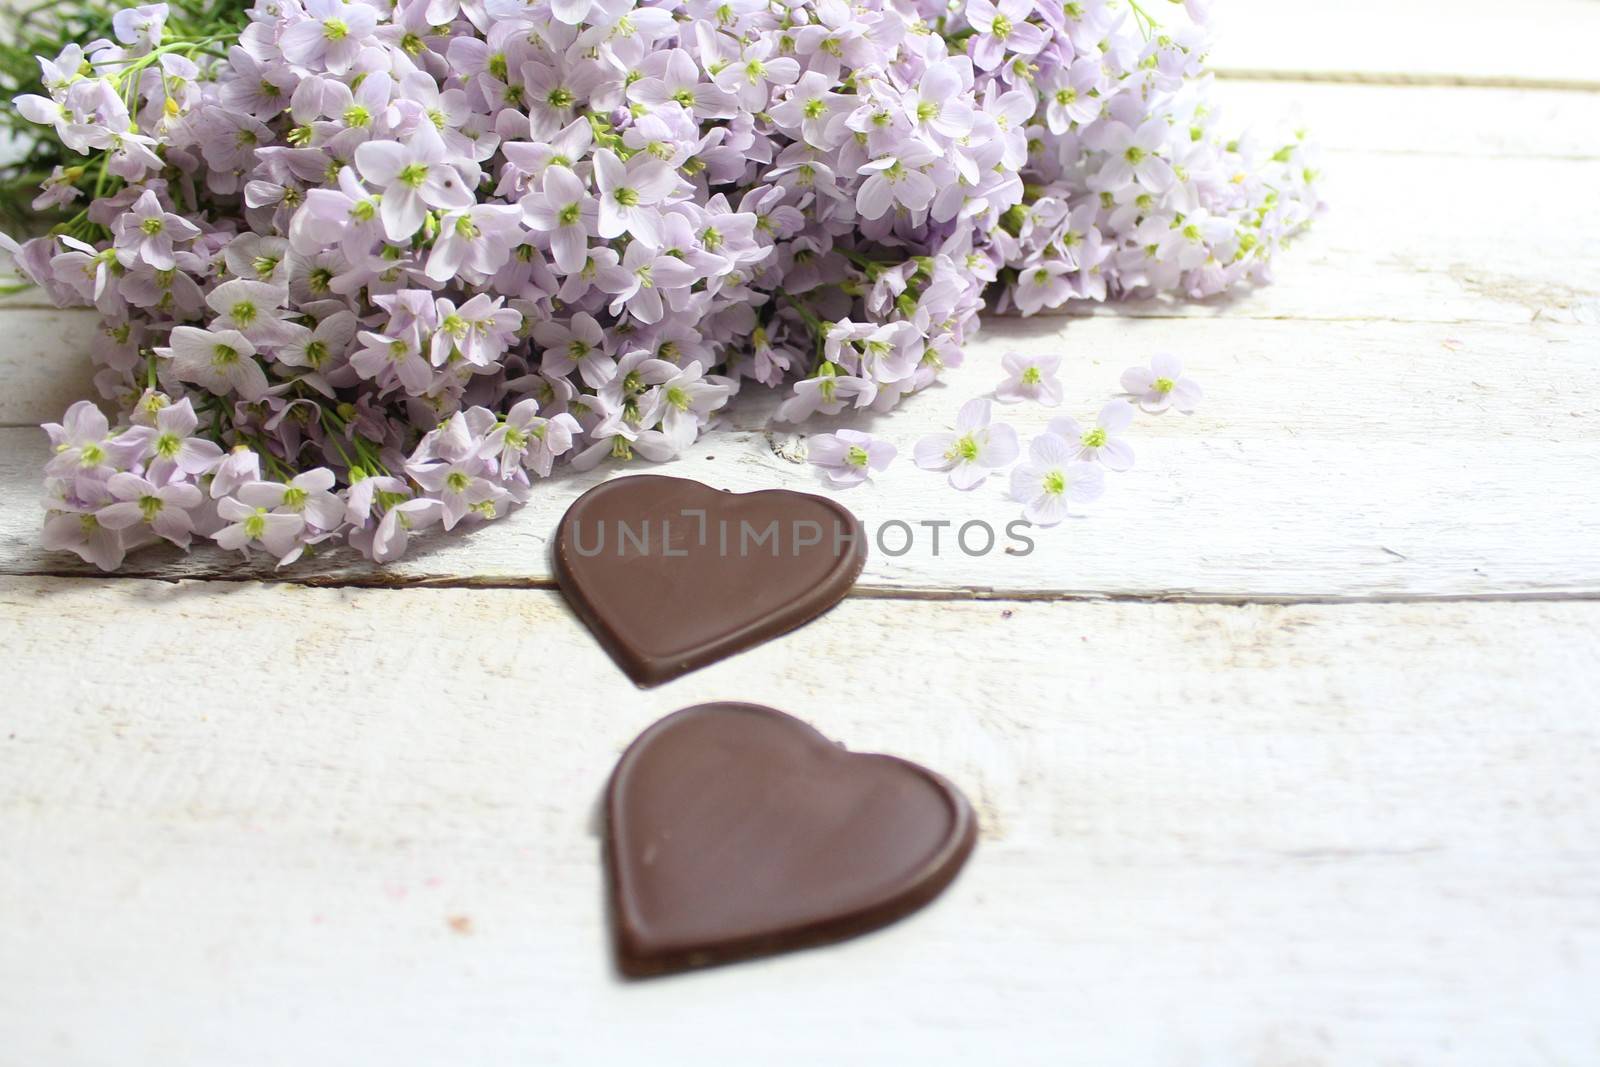 The picture shows cuckoo flowers with chocolate hearts.